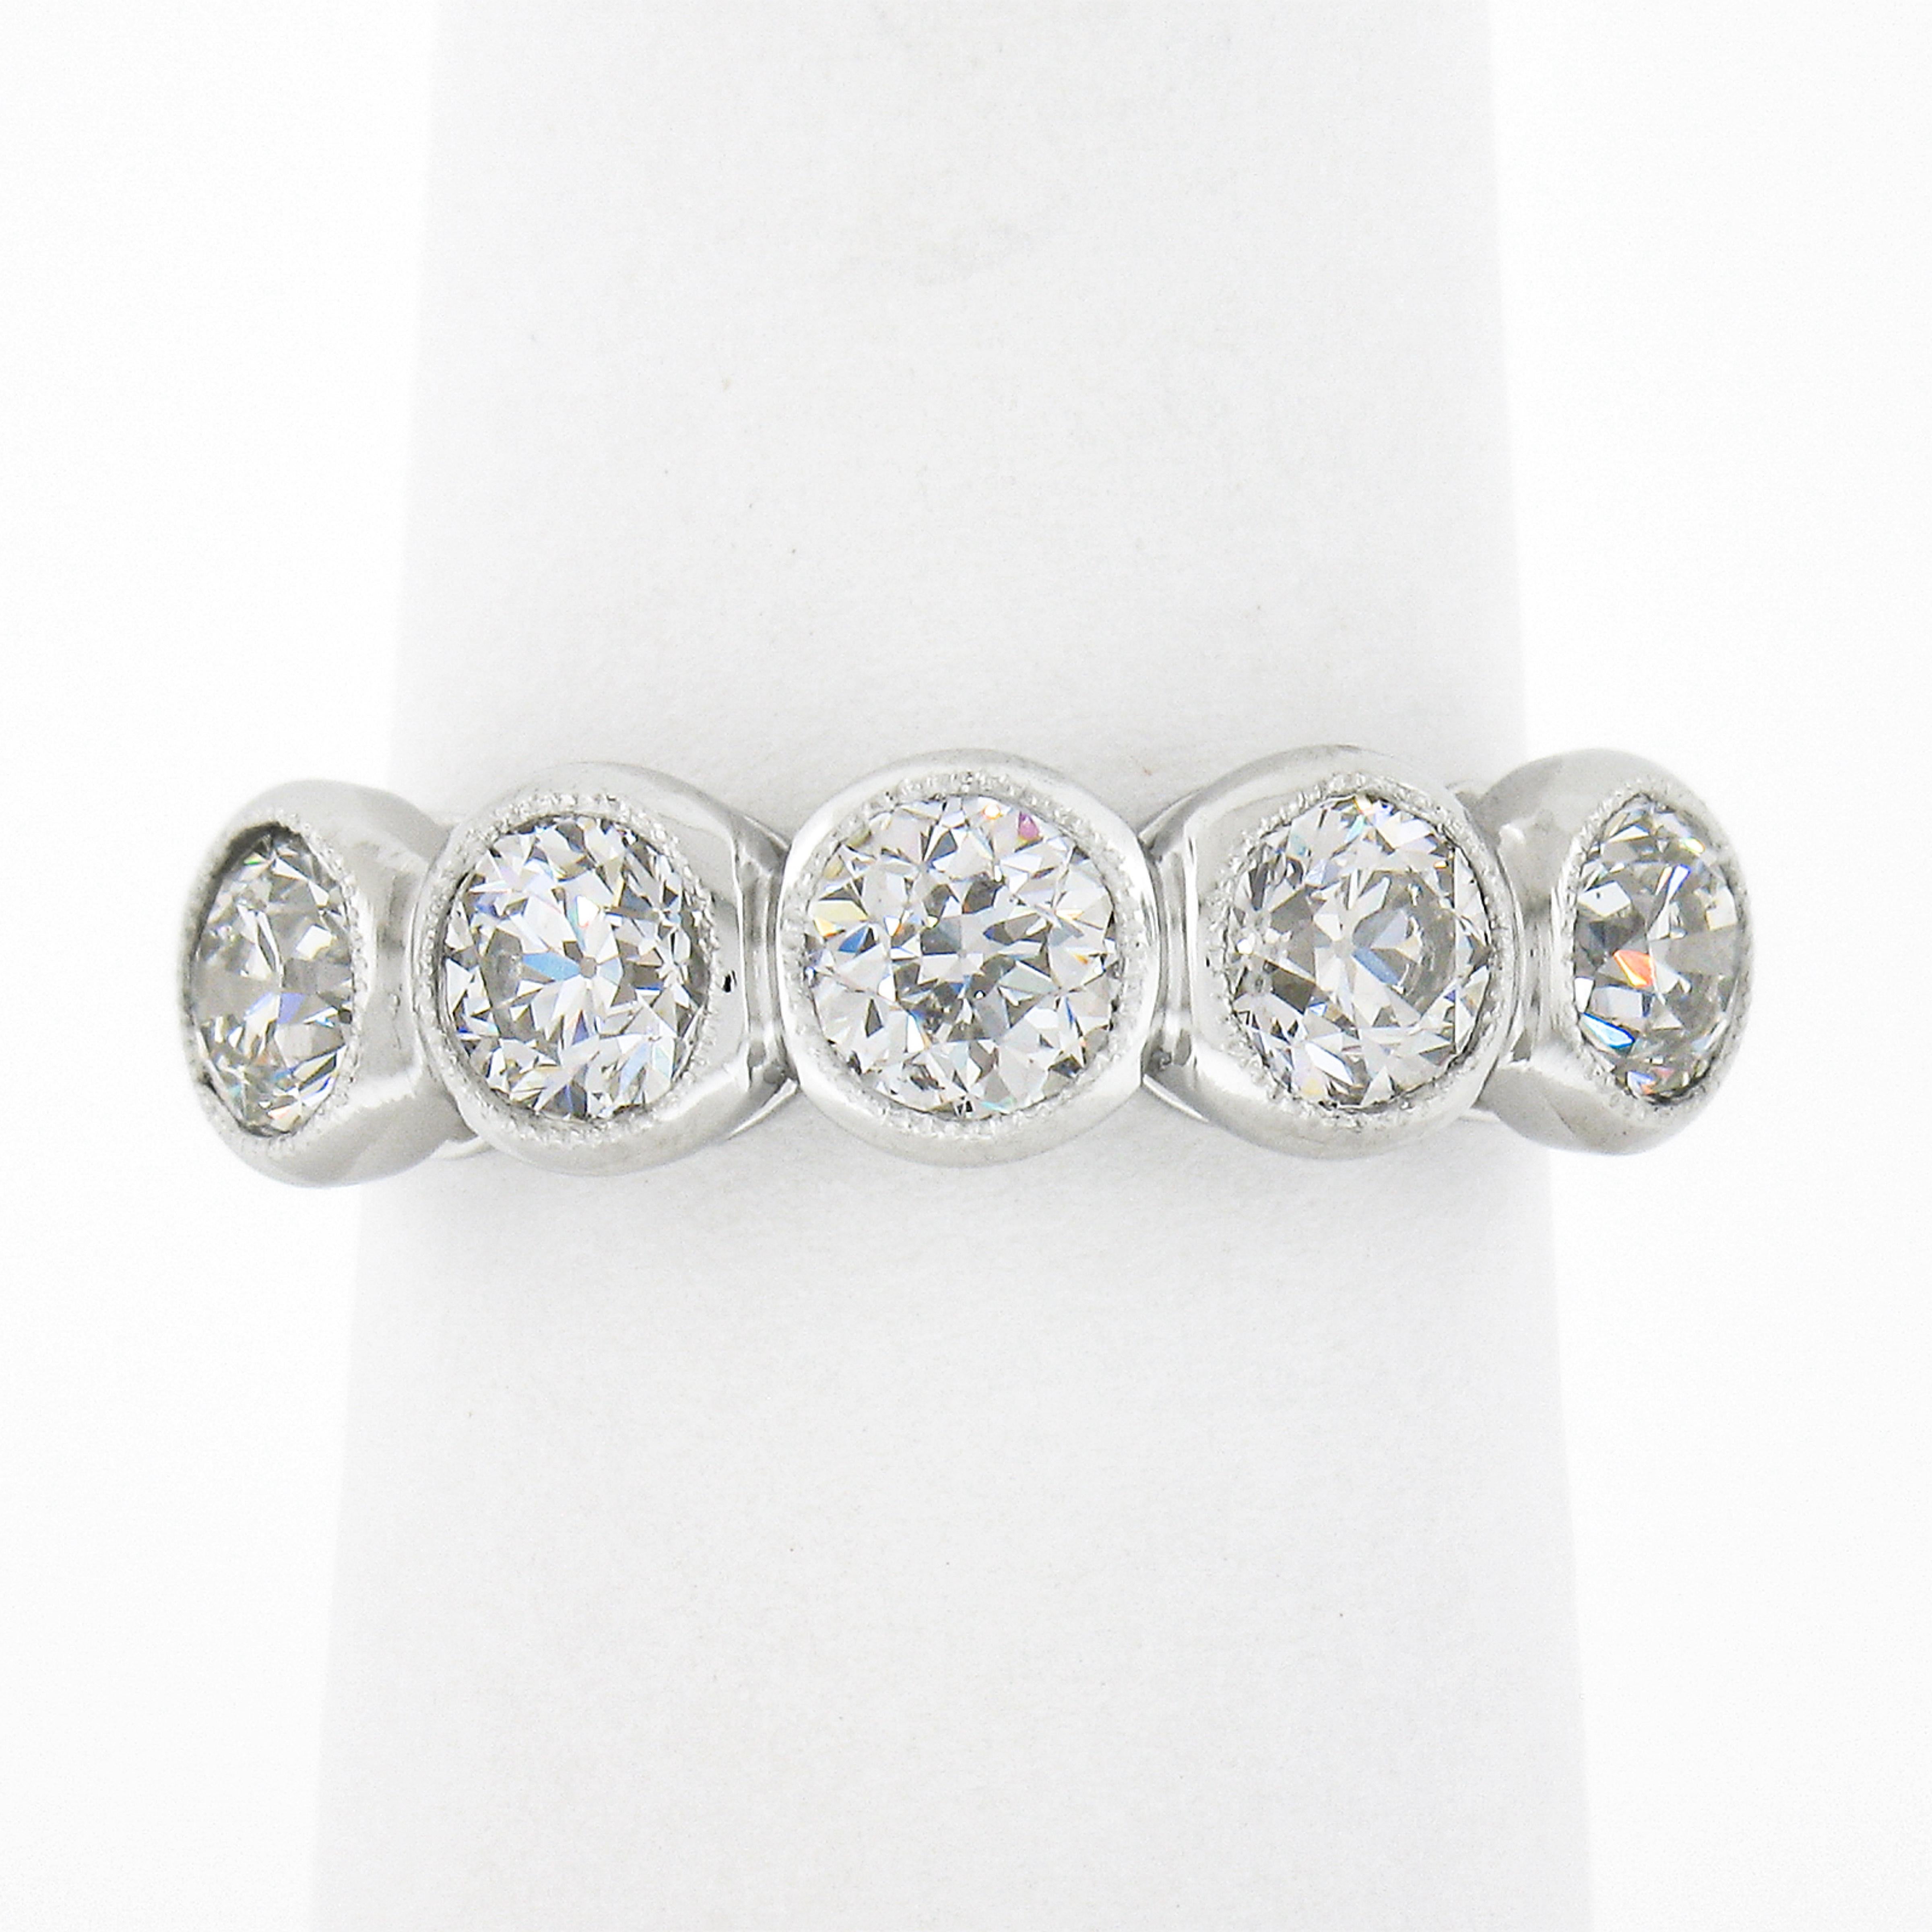 This magnificent diamond band ring was newly crafted from solid platinum and features 5 old European cut diamonds neatly bezel set with delicate milgrain etching across its top. Each of these fiery diamond shows a very nice large size, totaling